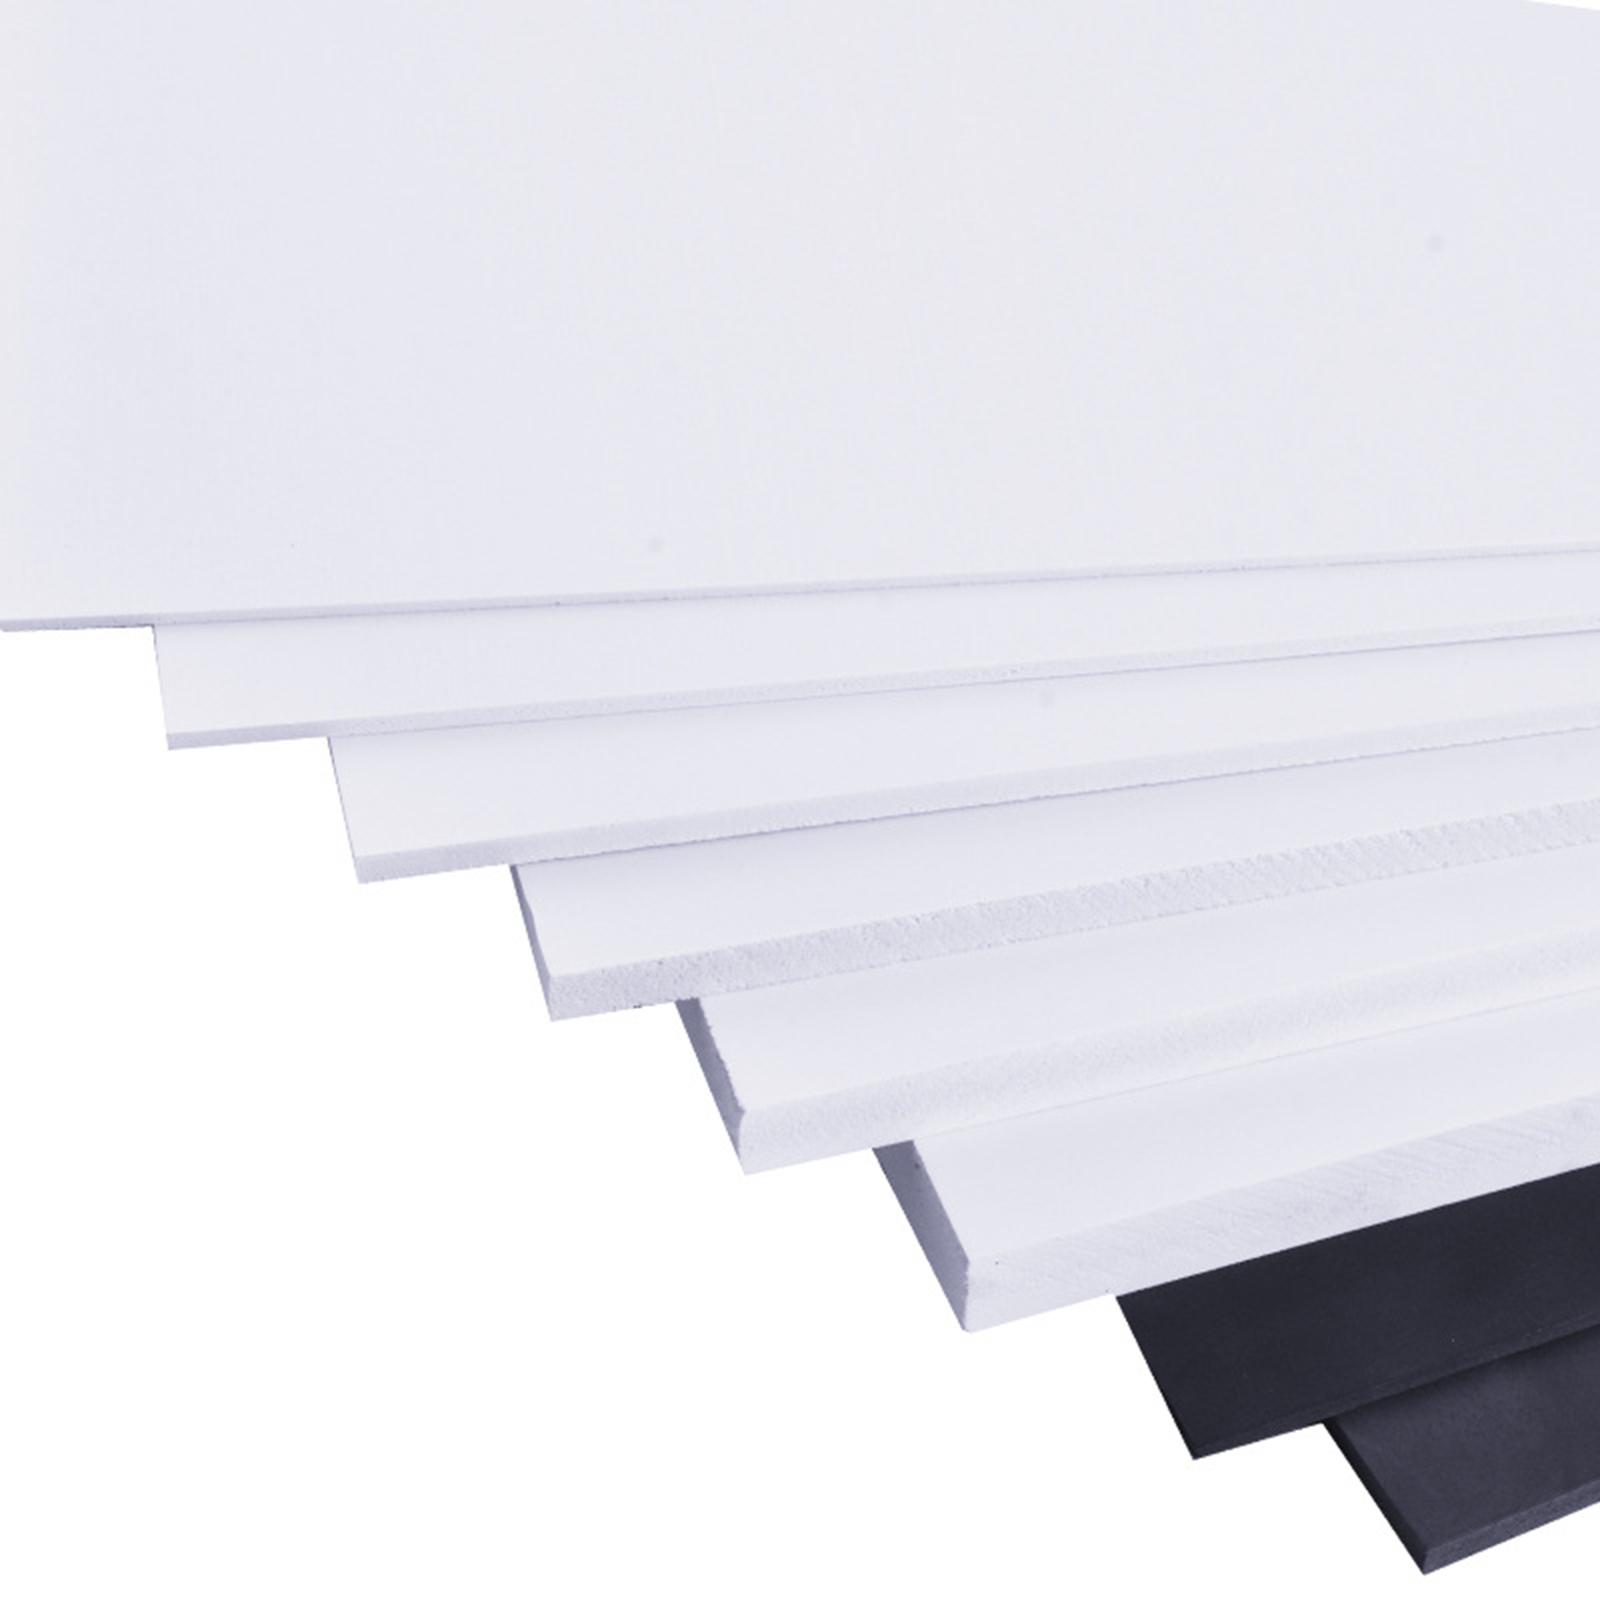 5 Sheets White Foam Boards--Sand Table Building Model Materials 2mm / 3mm  Thick Foam PVC Sheet Poster Board Mount Board for Mounting, Crafts,  Modelling, Art, Display, School Projects 